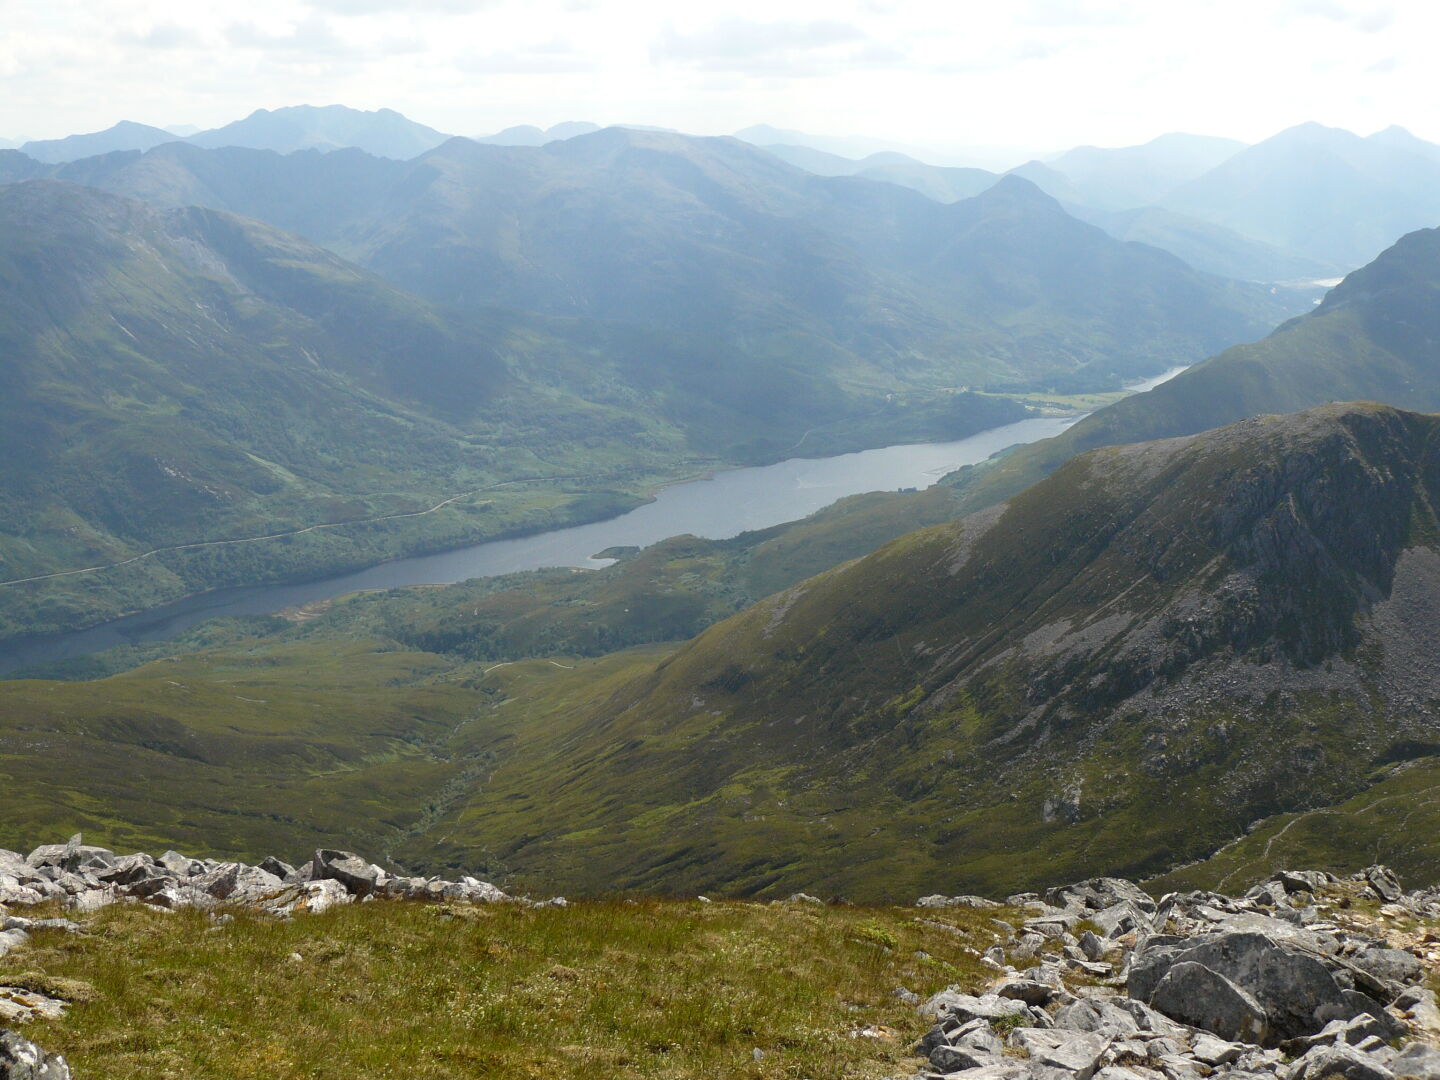 Loch Leven lies far below us to the south, and Ben Nevis in the North. Meandering streams decorate the valleys in between. Right image (c) James Mellors.